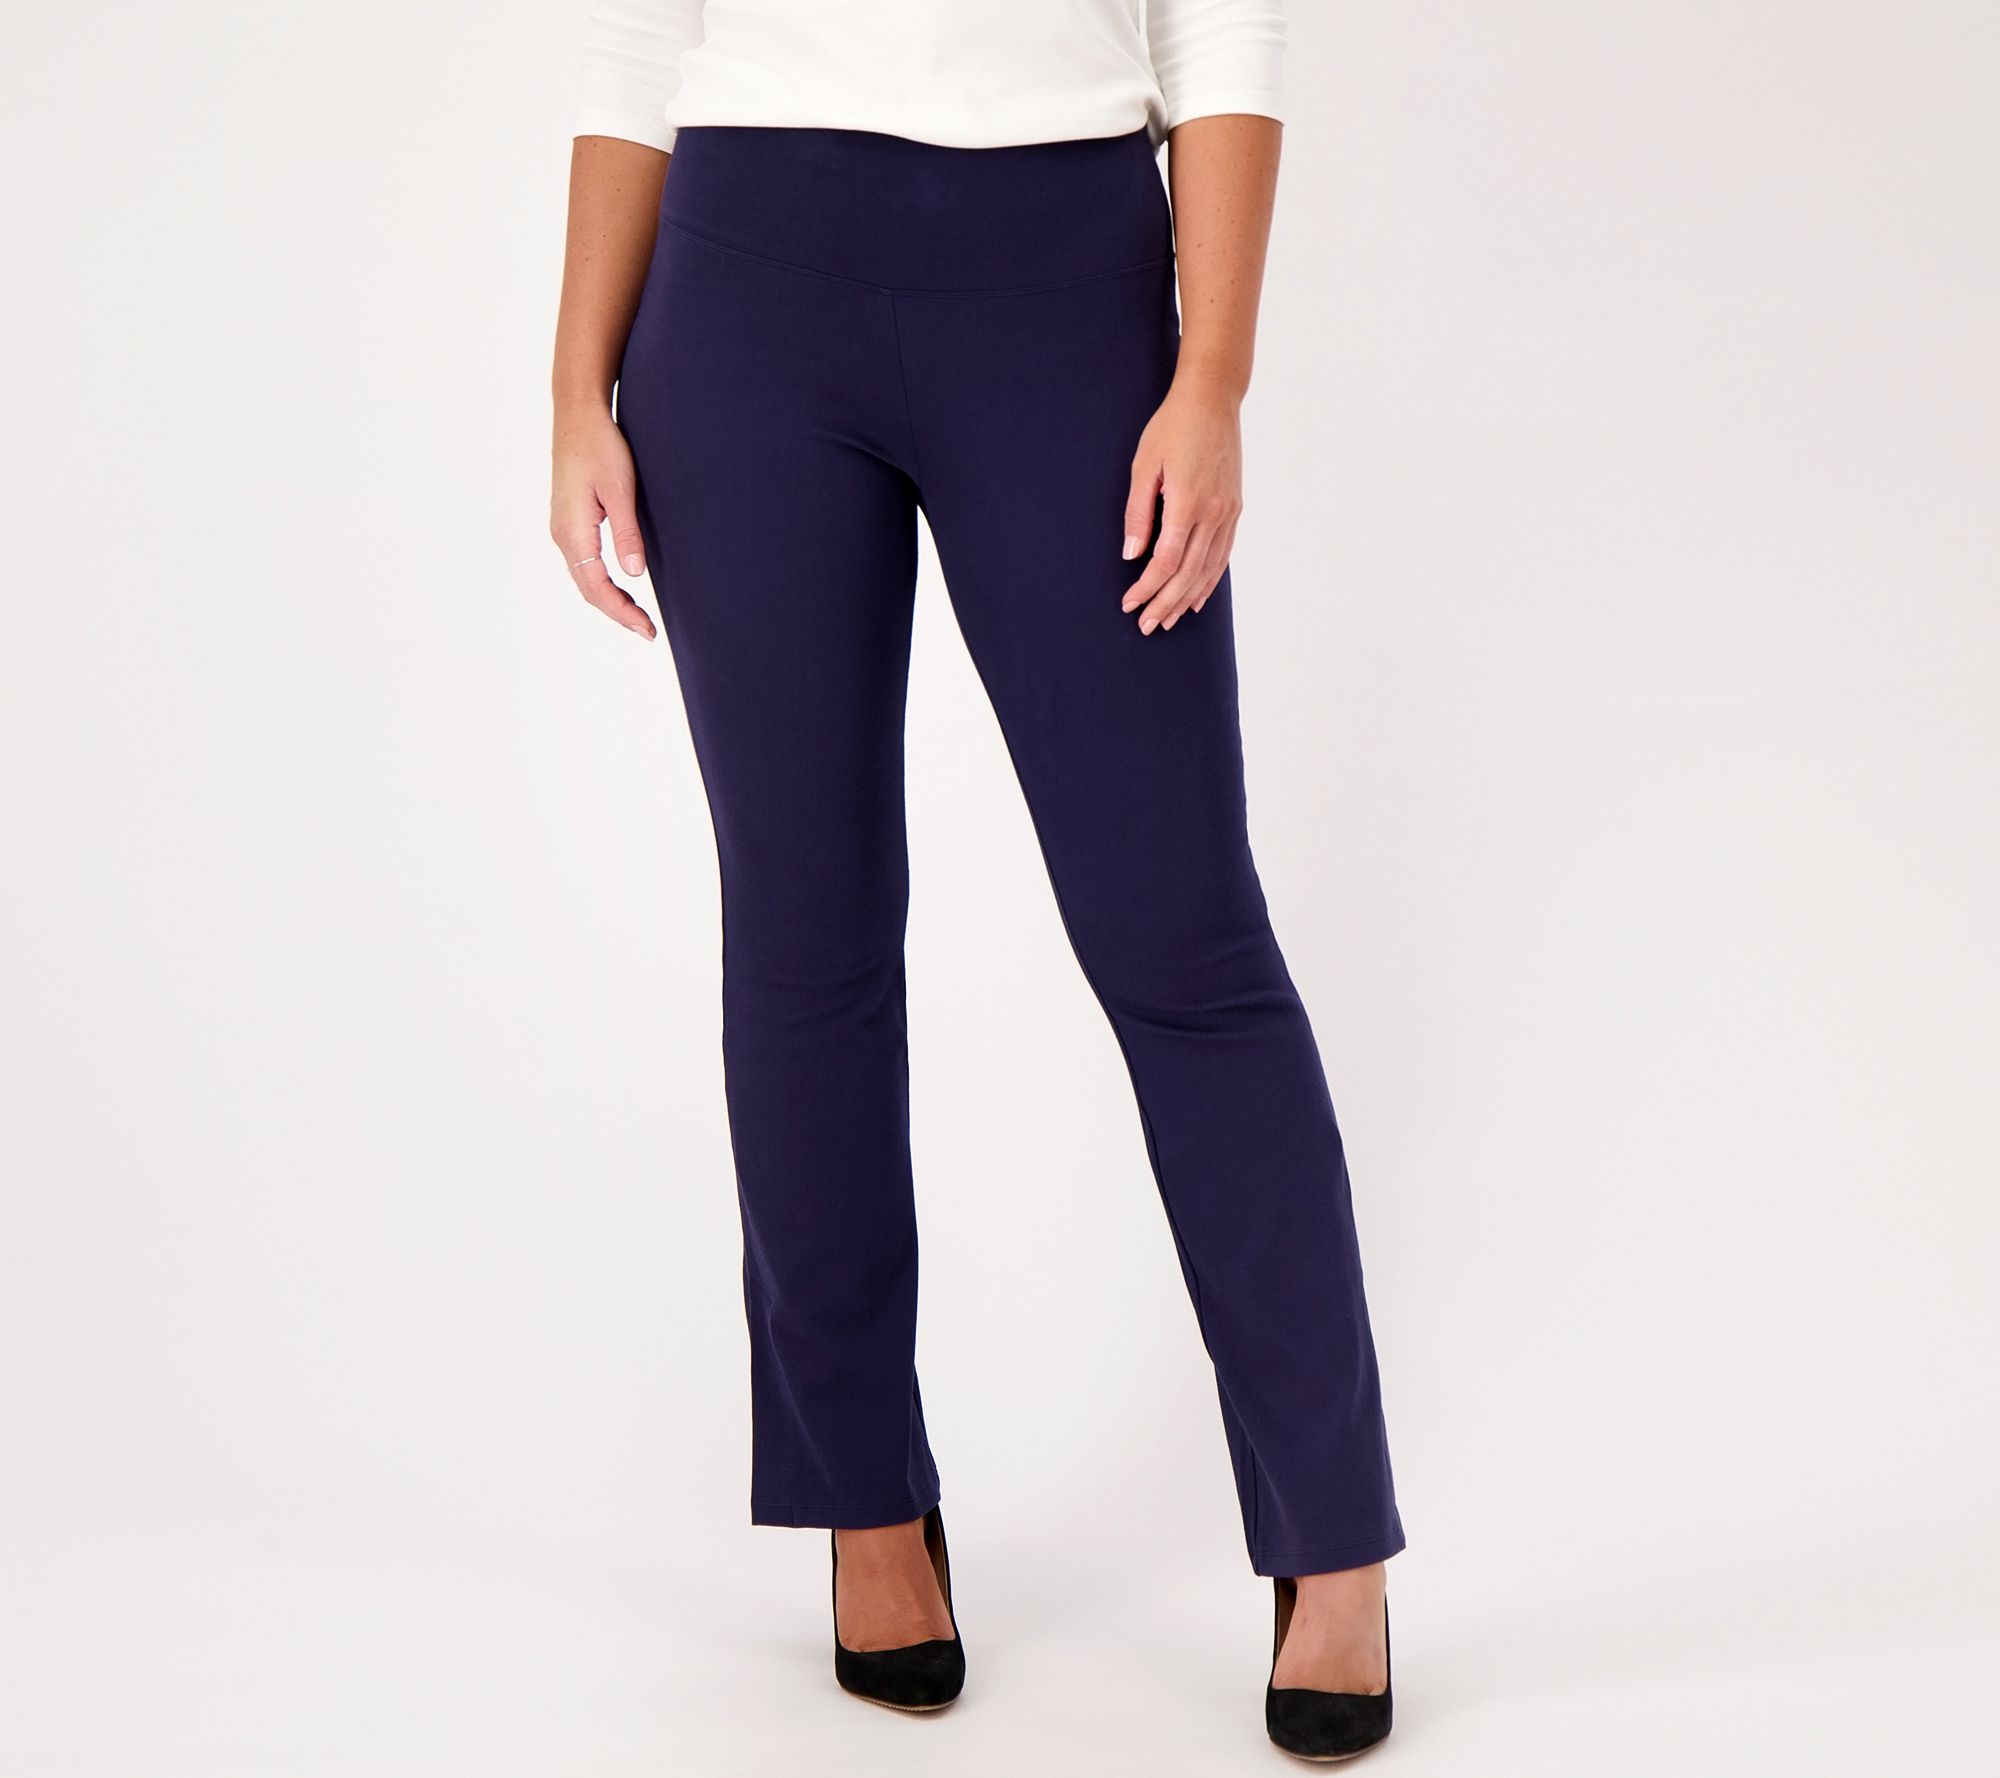 Women with Control Petite Tummy Control St.Tropez Twill Bootcut Pants 